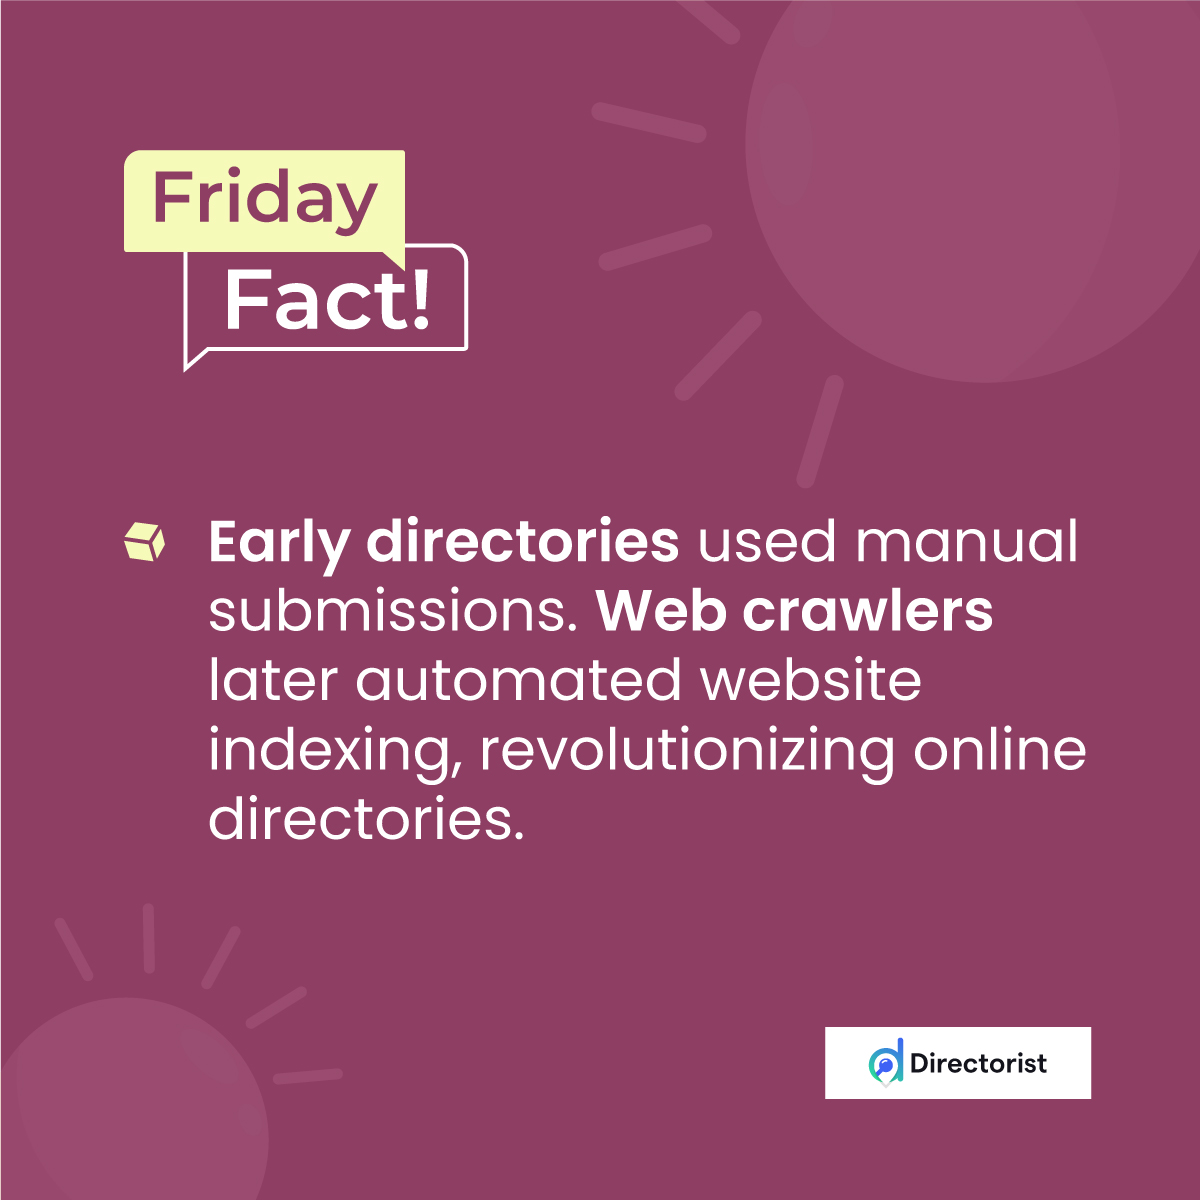 From manual entries to automated indexing, the evolution of online directories is fascinating!
#onlinedirectories #techfacts #factoftheday  #webcrawlers #didyouknow